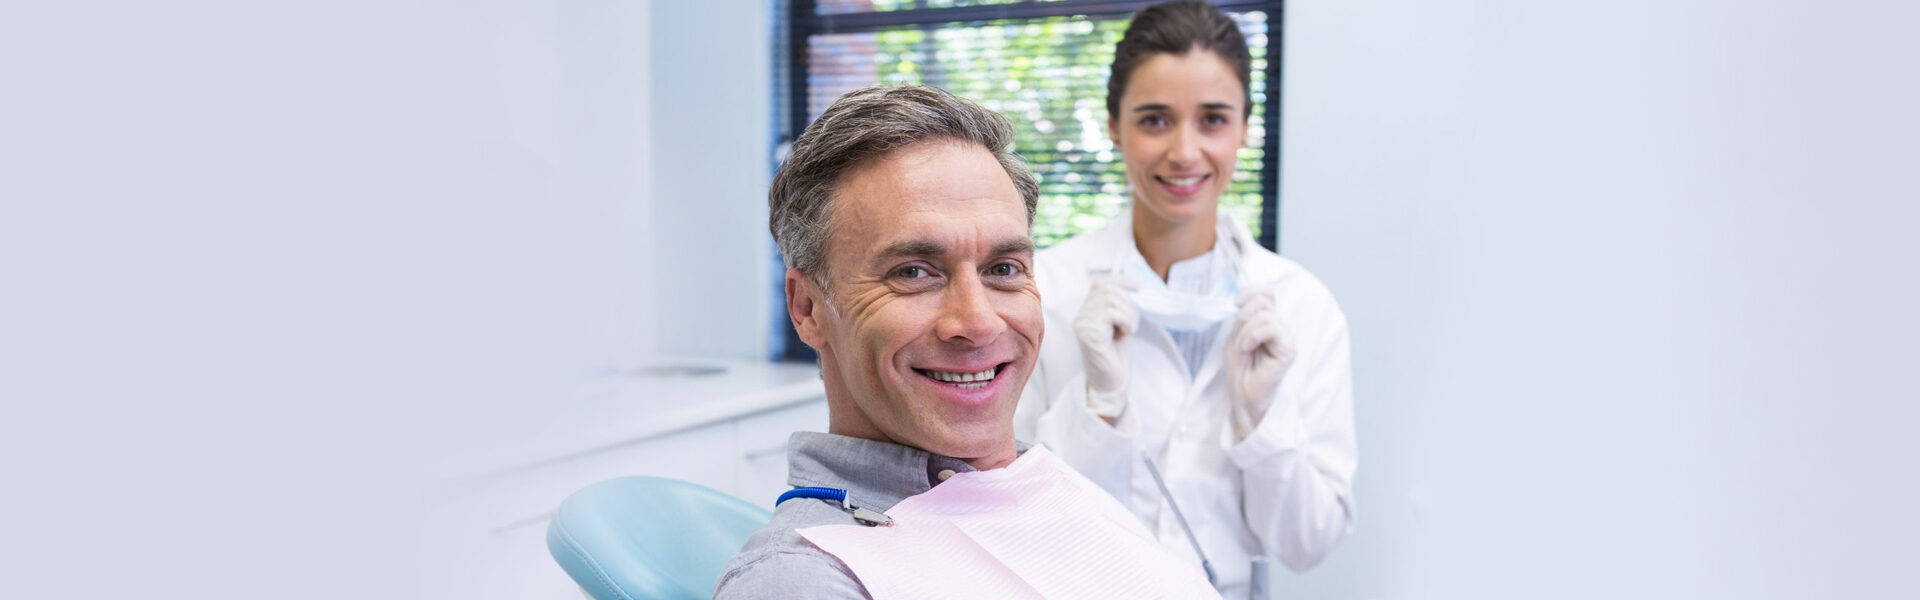 Dental Exams and Cleanings in Downtown Toronto